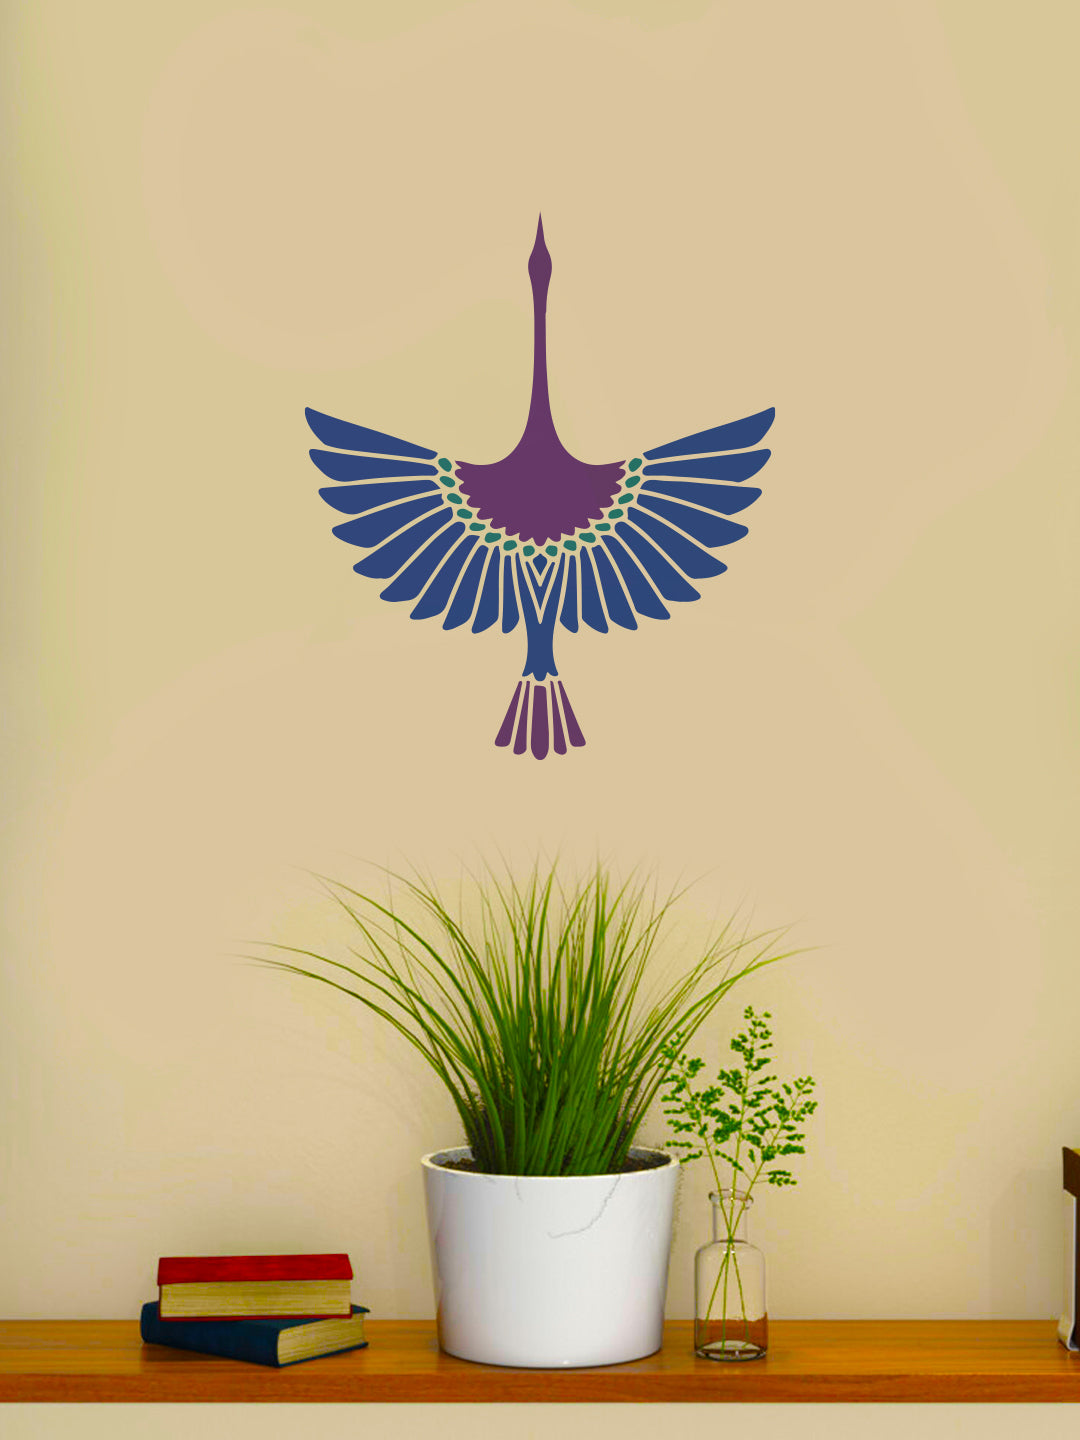 Kayra Decor Cranes Design Stencil for Wall Painting (KDMD1422)